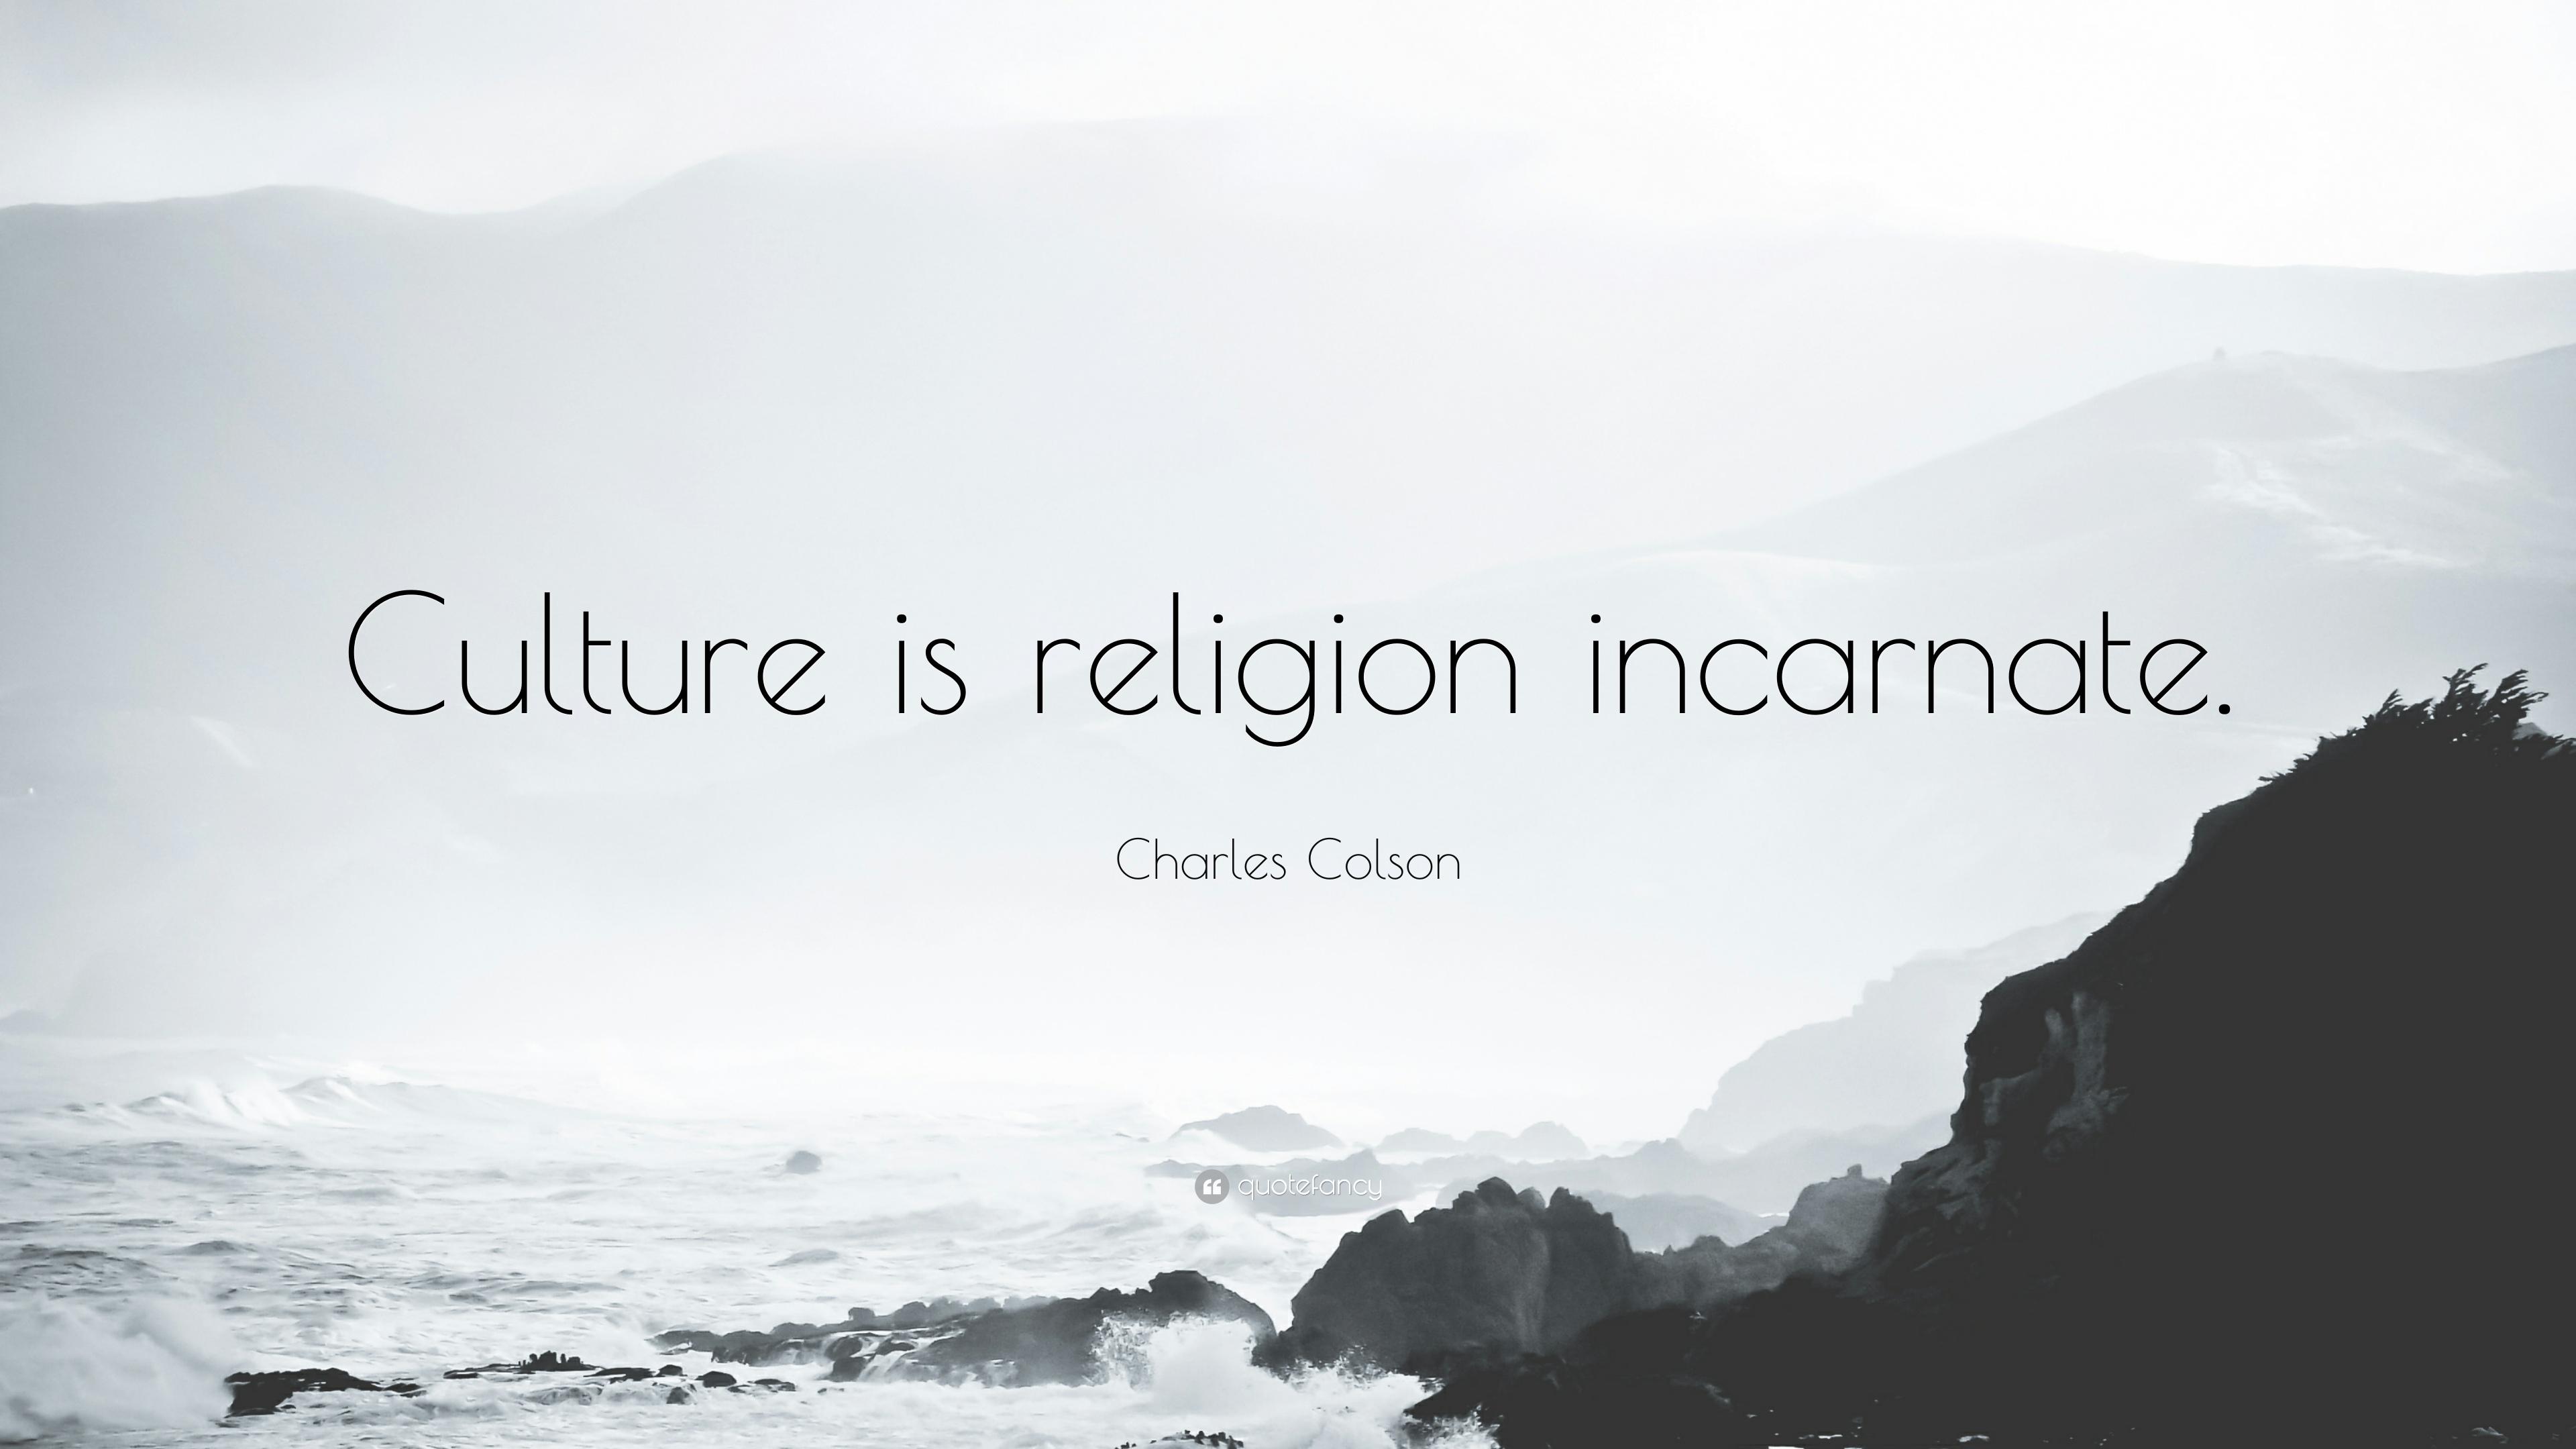 Charles Colson Quote: “Culture is religion incarnate.” 9 wallpaper